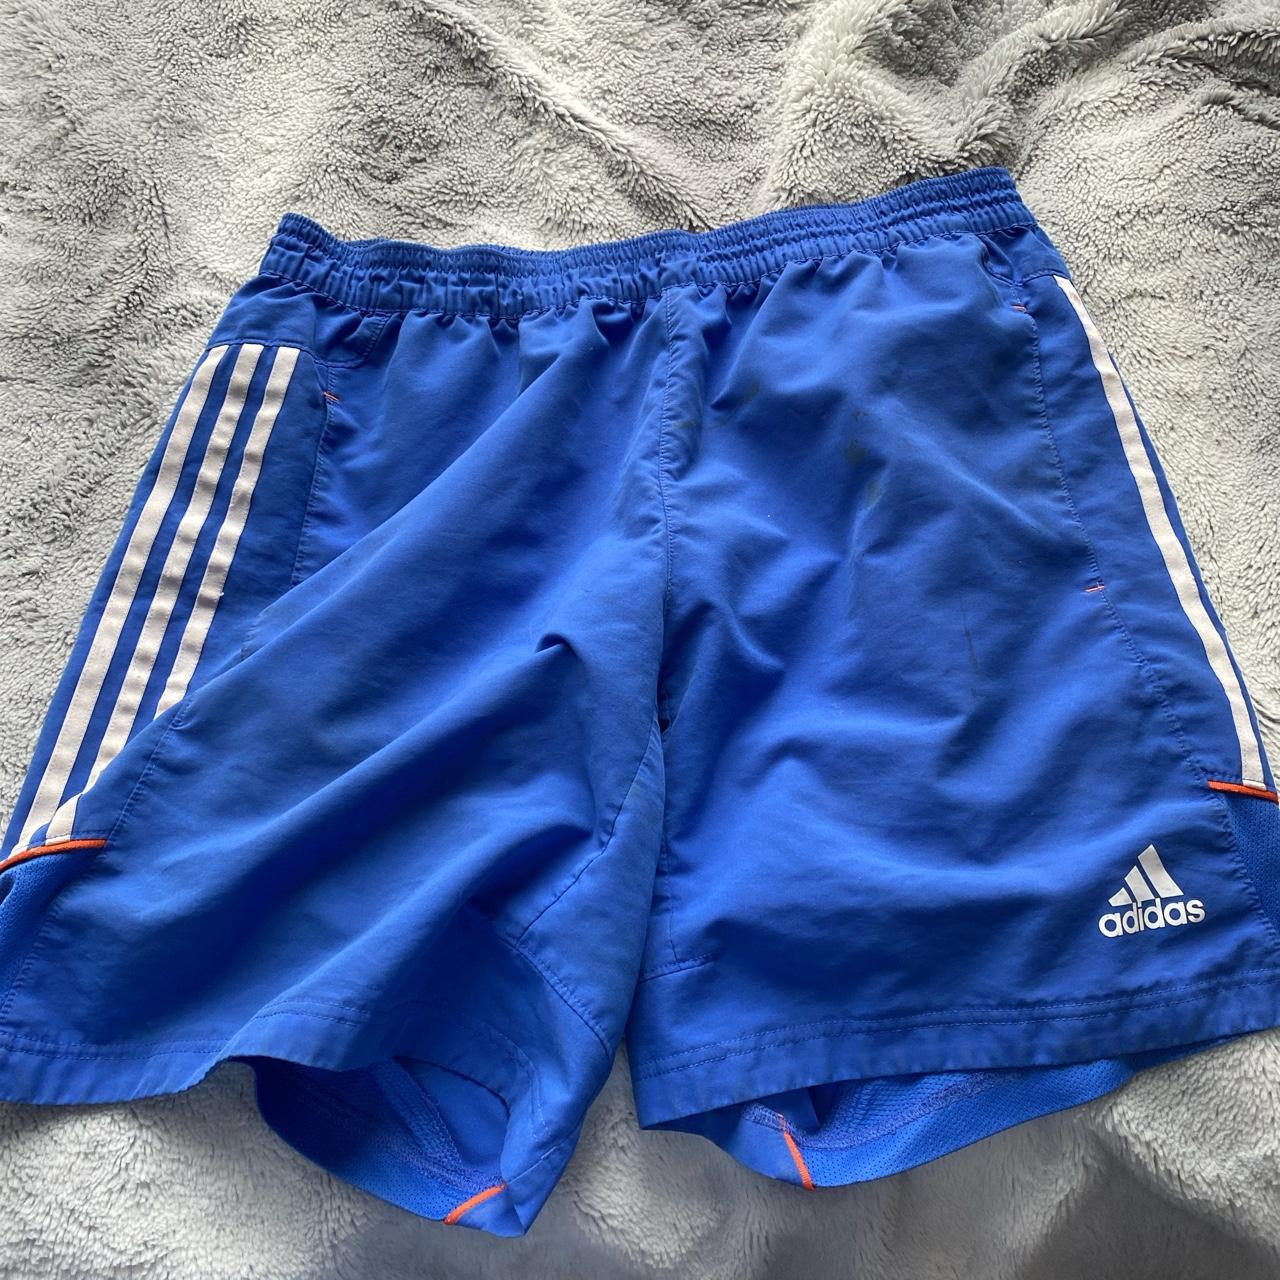 Adidas Women's Blue and White Shorts | Depop